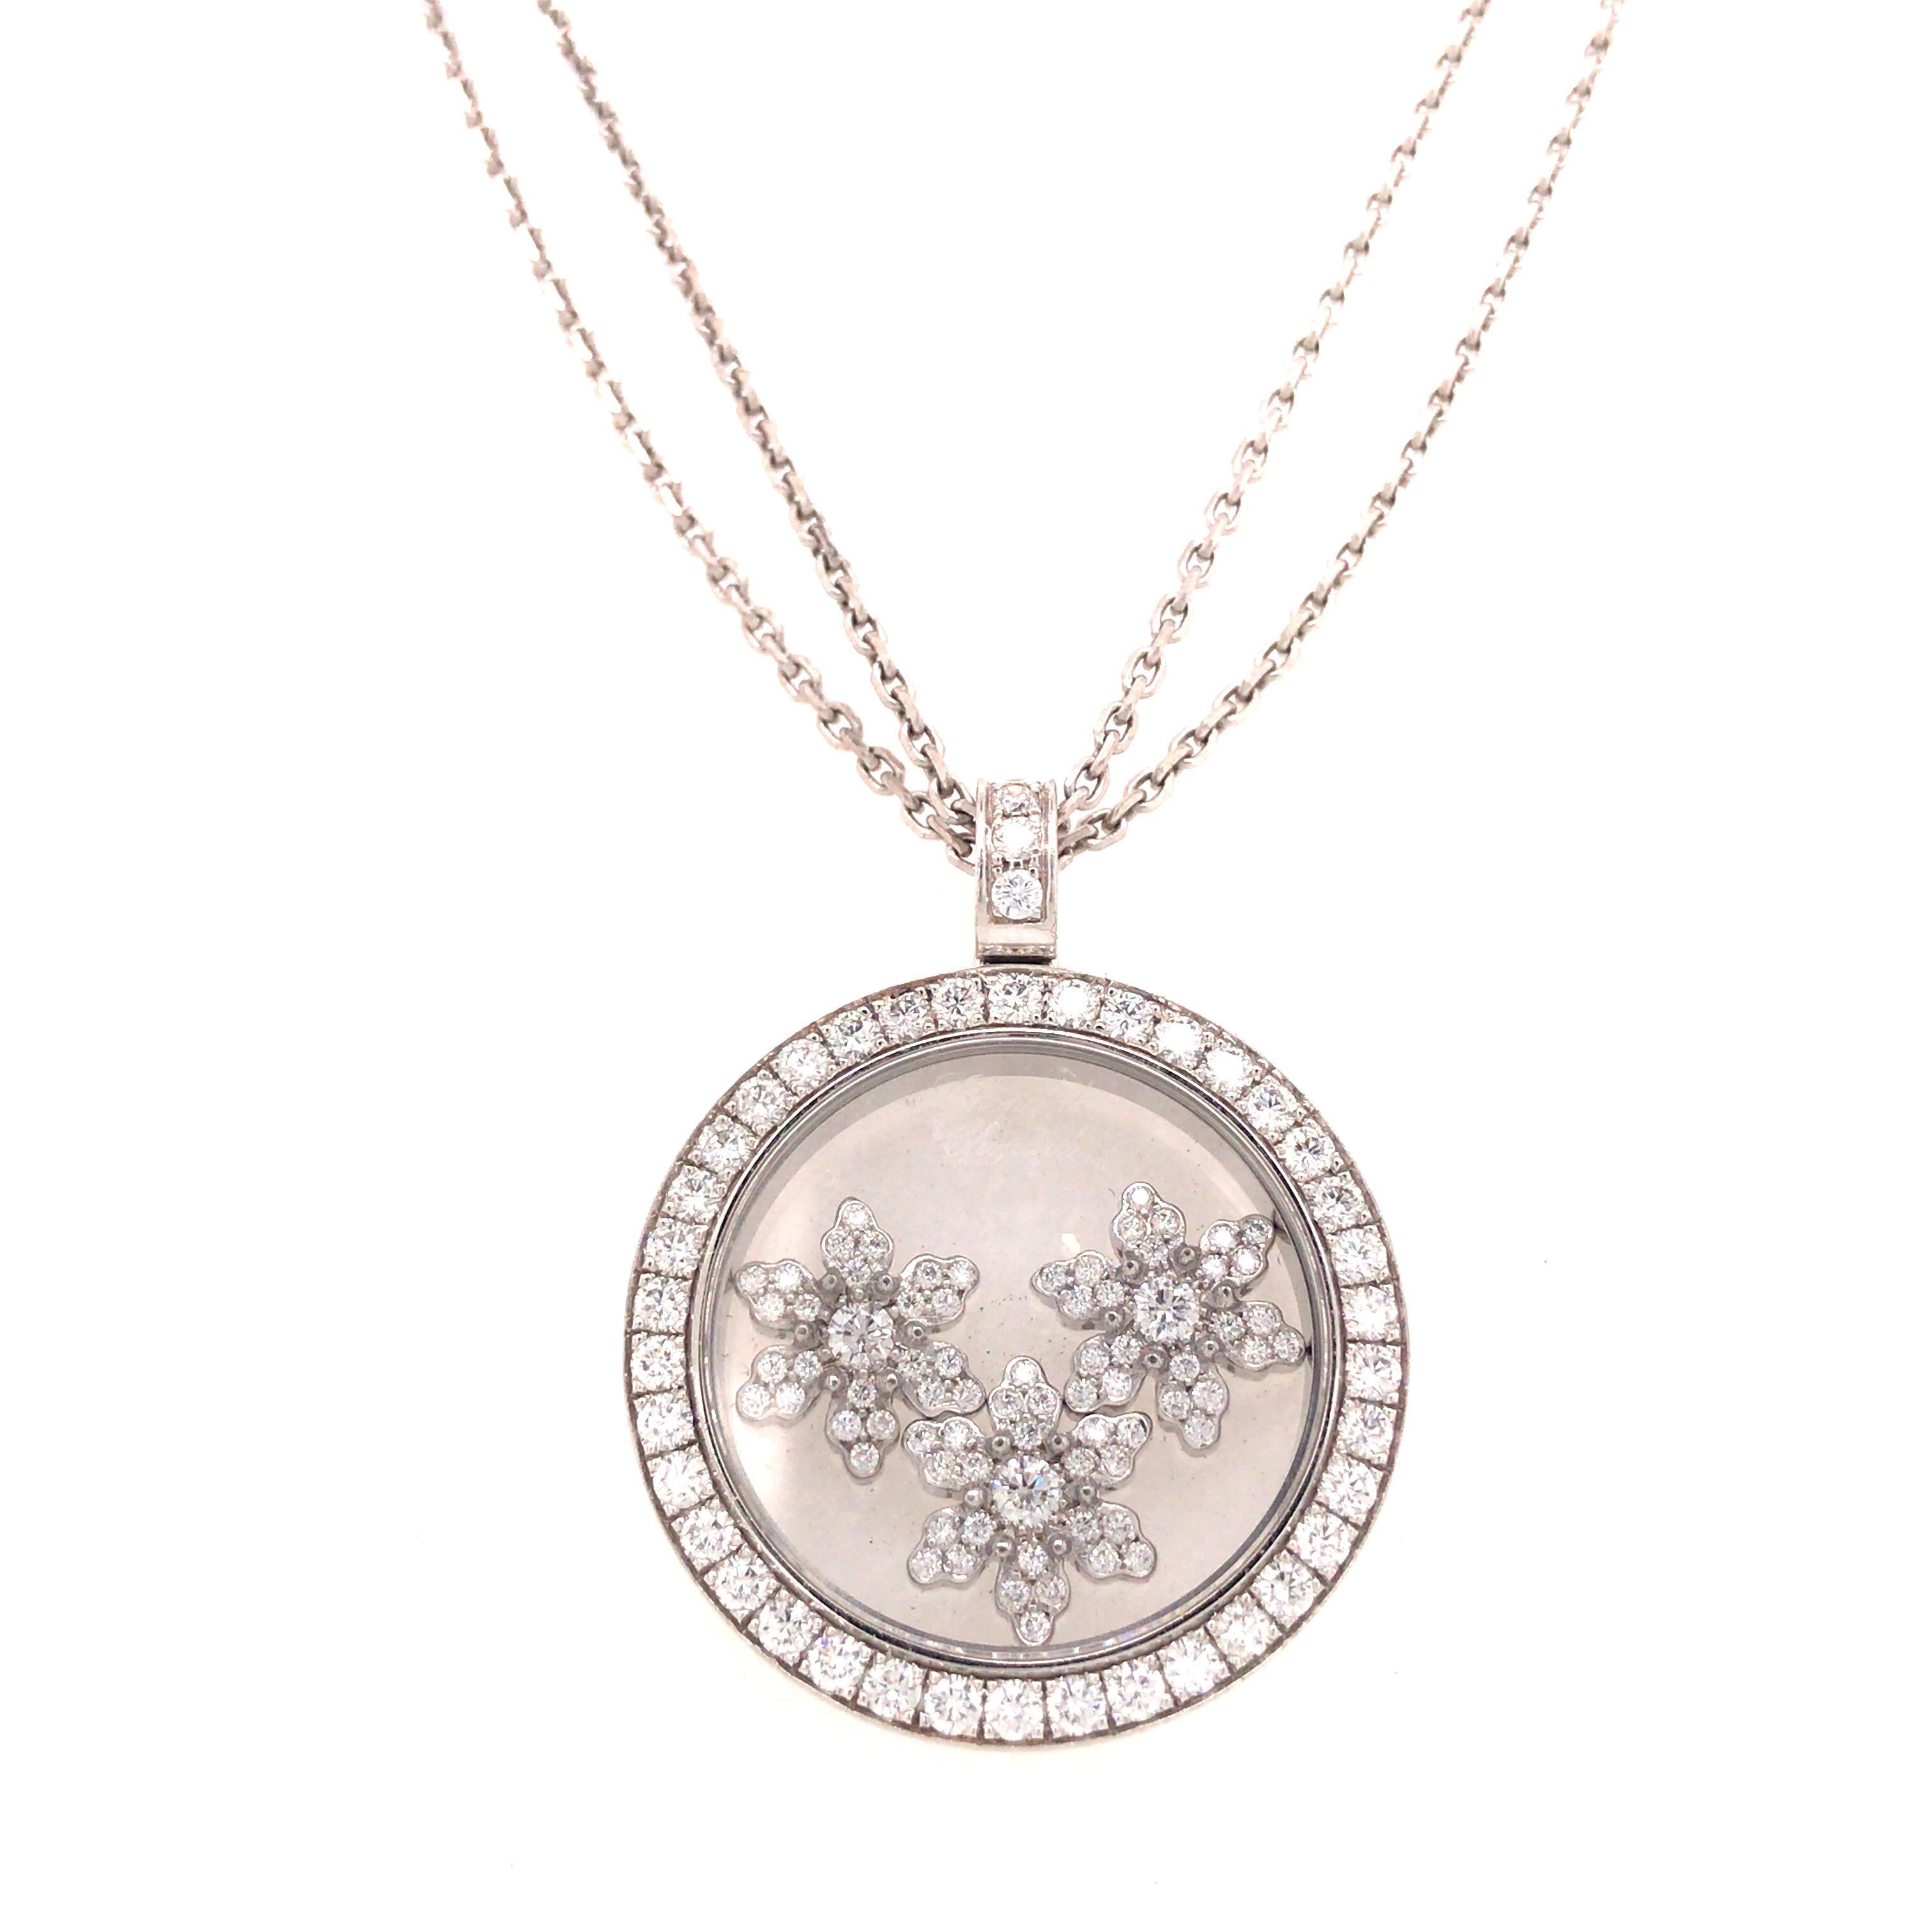 Chopard Happy Sport Snowflakes Pendant Double Strand Necklace in 18K White Gold